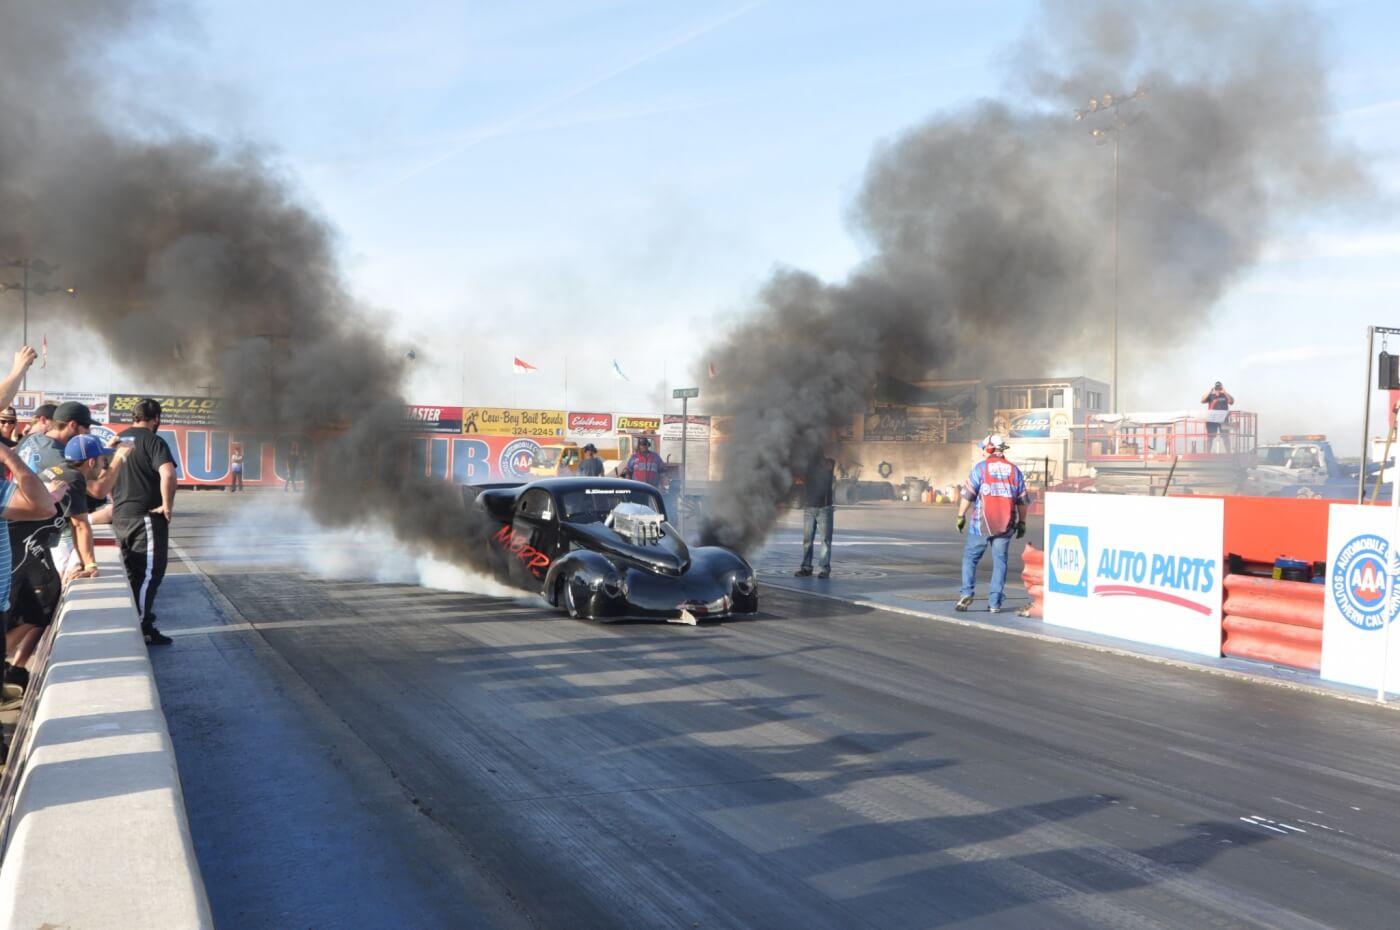 Ryan Milliken piloted the Duramax-powered, Pro Stock “Batmobile” to a win in Pro Stock.